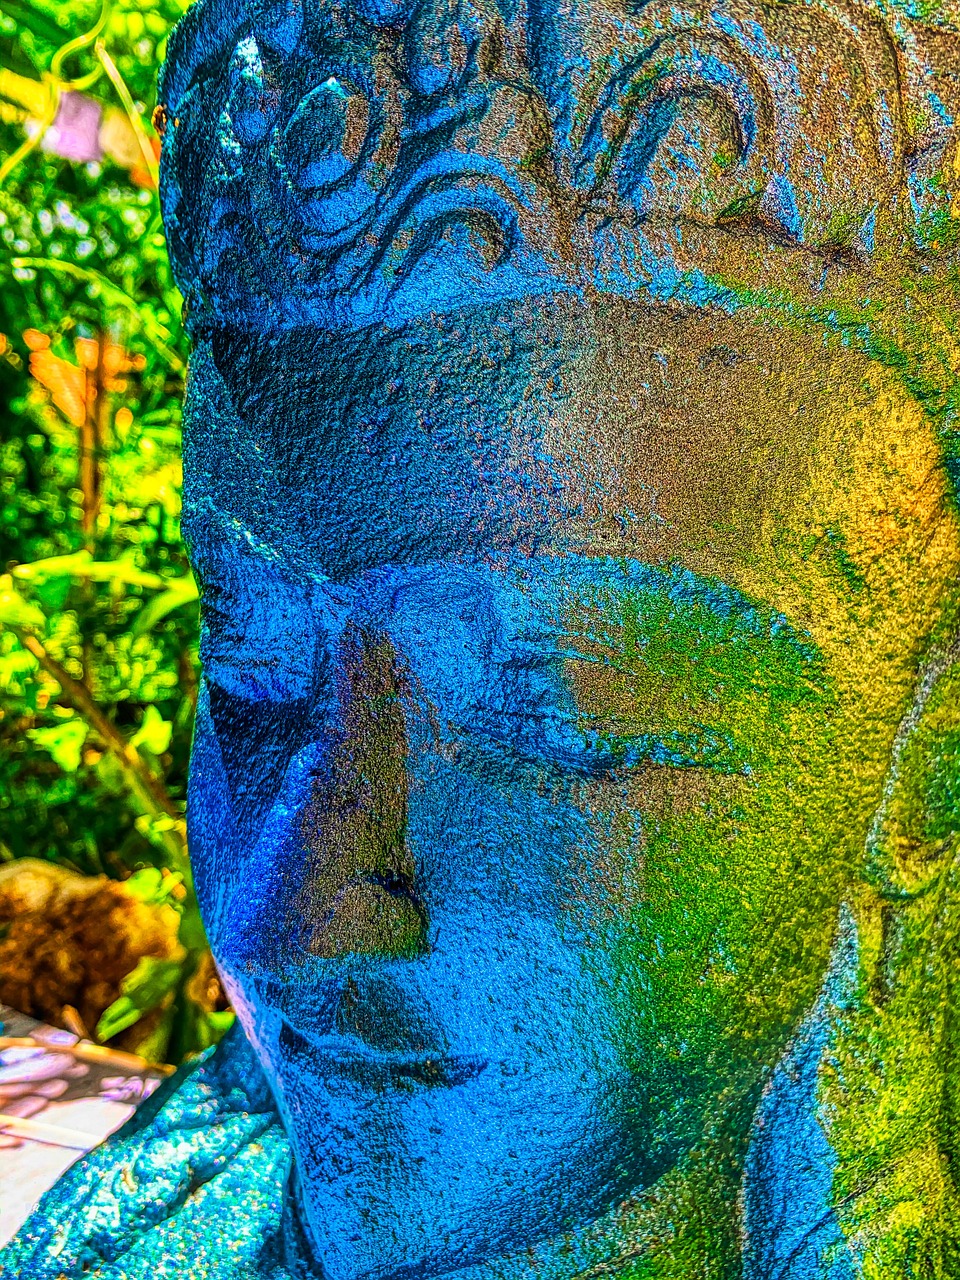 a close up of a statue of a person, concrete art, iridescent accents. vibrant, buddha, in marijuanas gardens, warm shades of blue